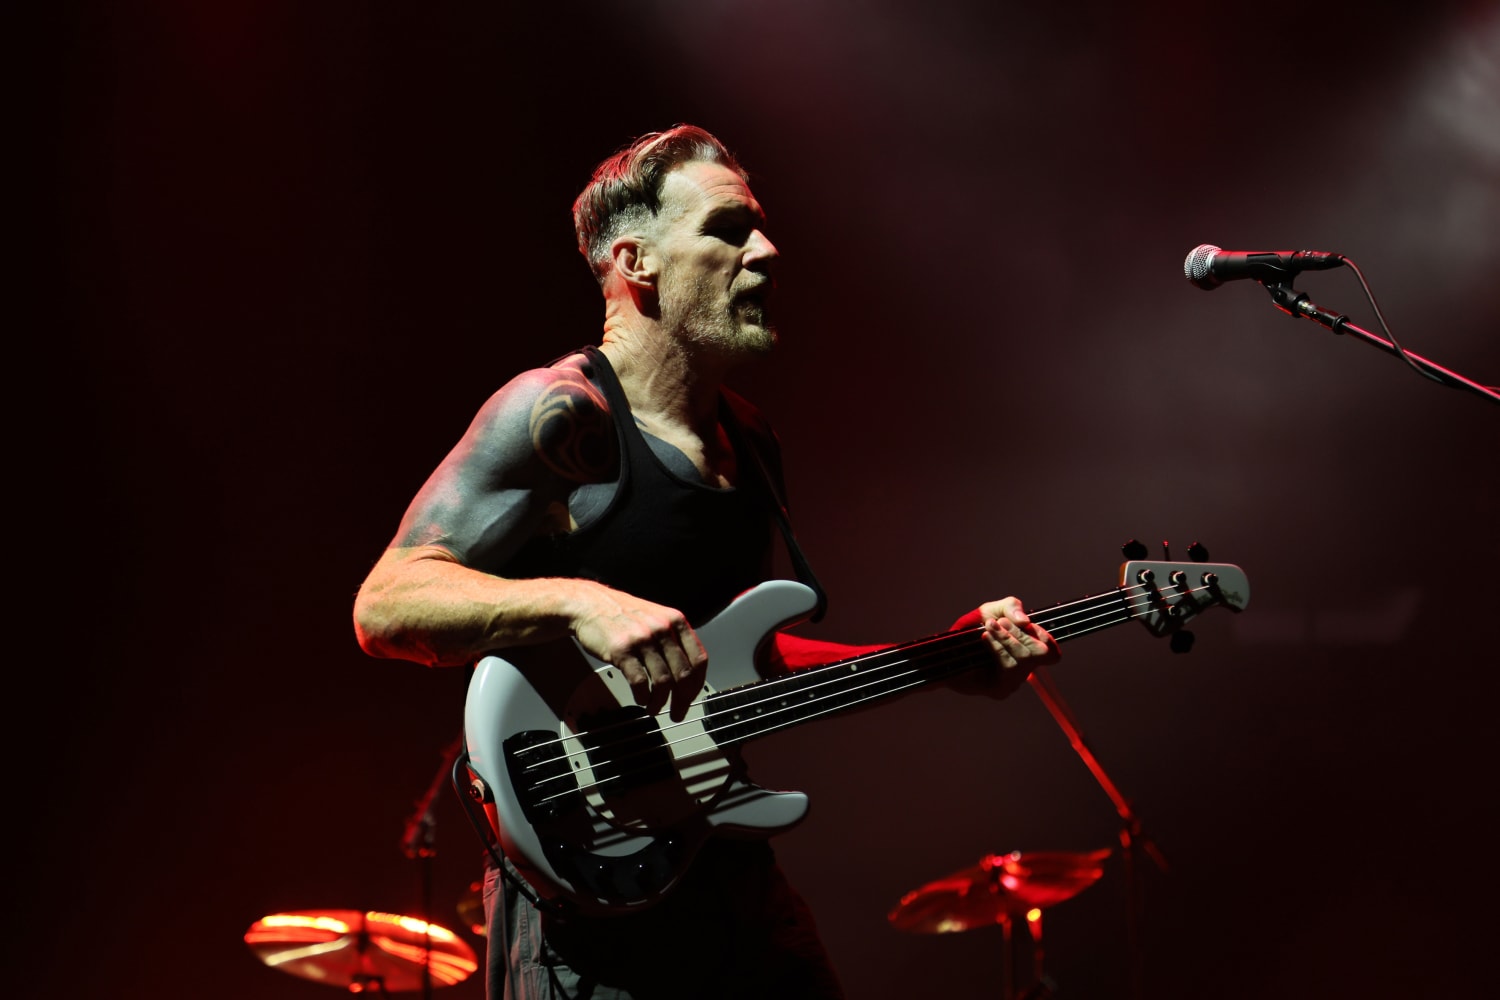 Rage Against the Machine bassist reveals he has prostate cancer